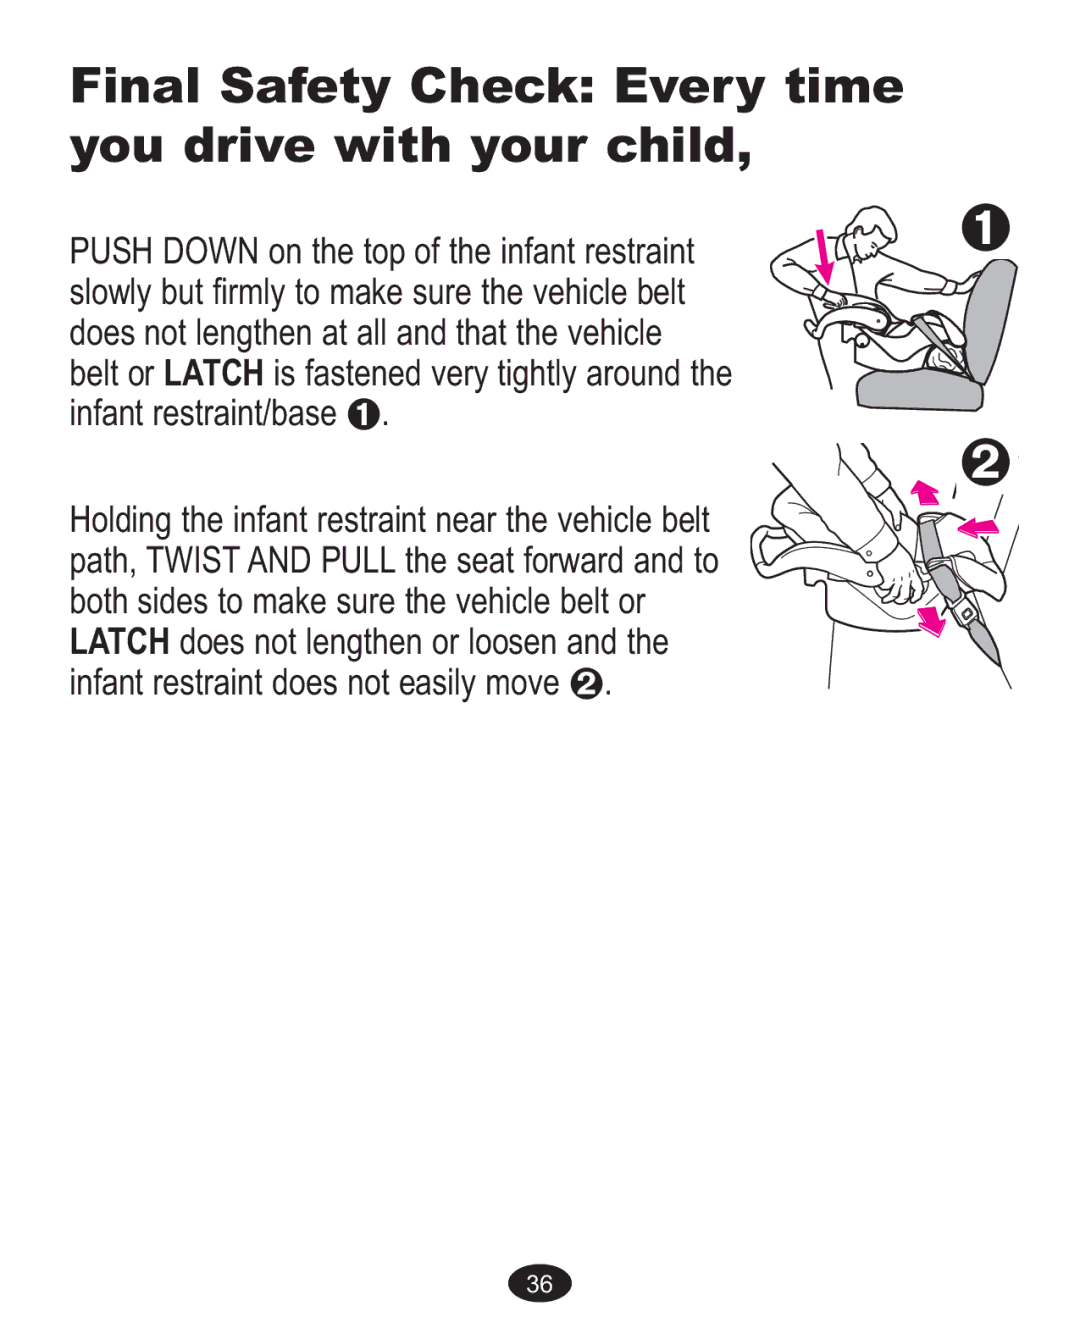 Graco PD159939A owner manual Final Safety Check Every time you drive with your child 